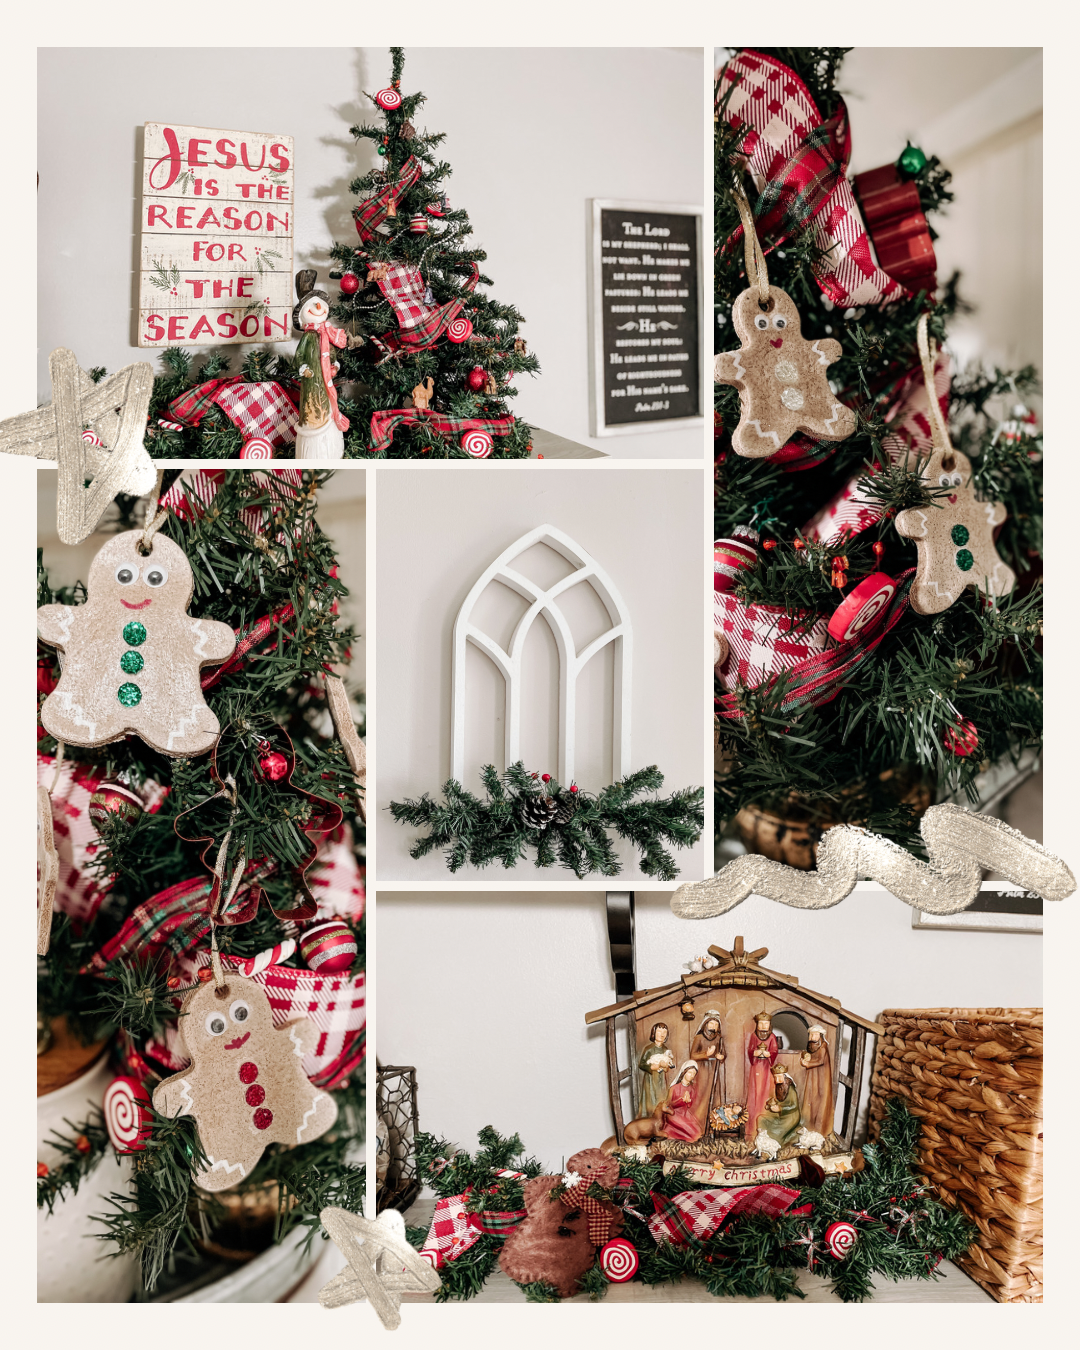 More Christmas at the Wesley's | Blogmas 2022